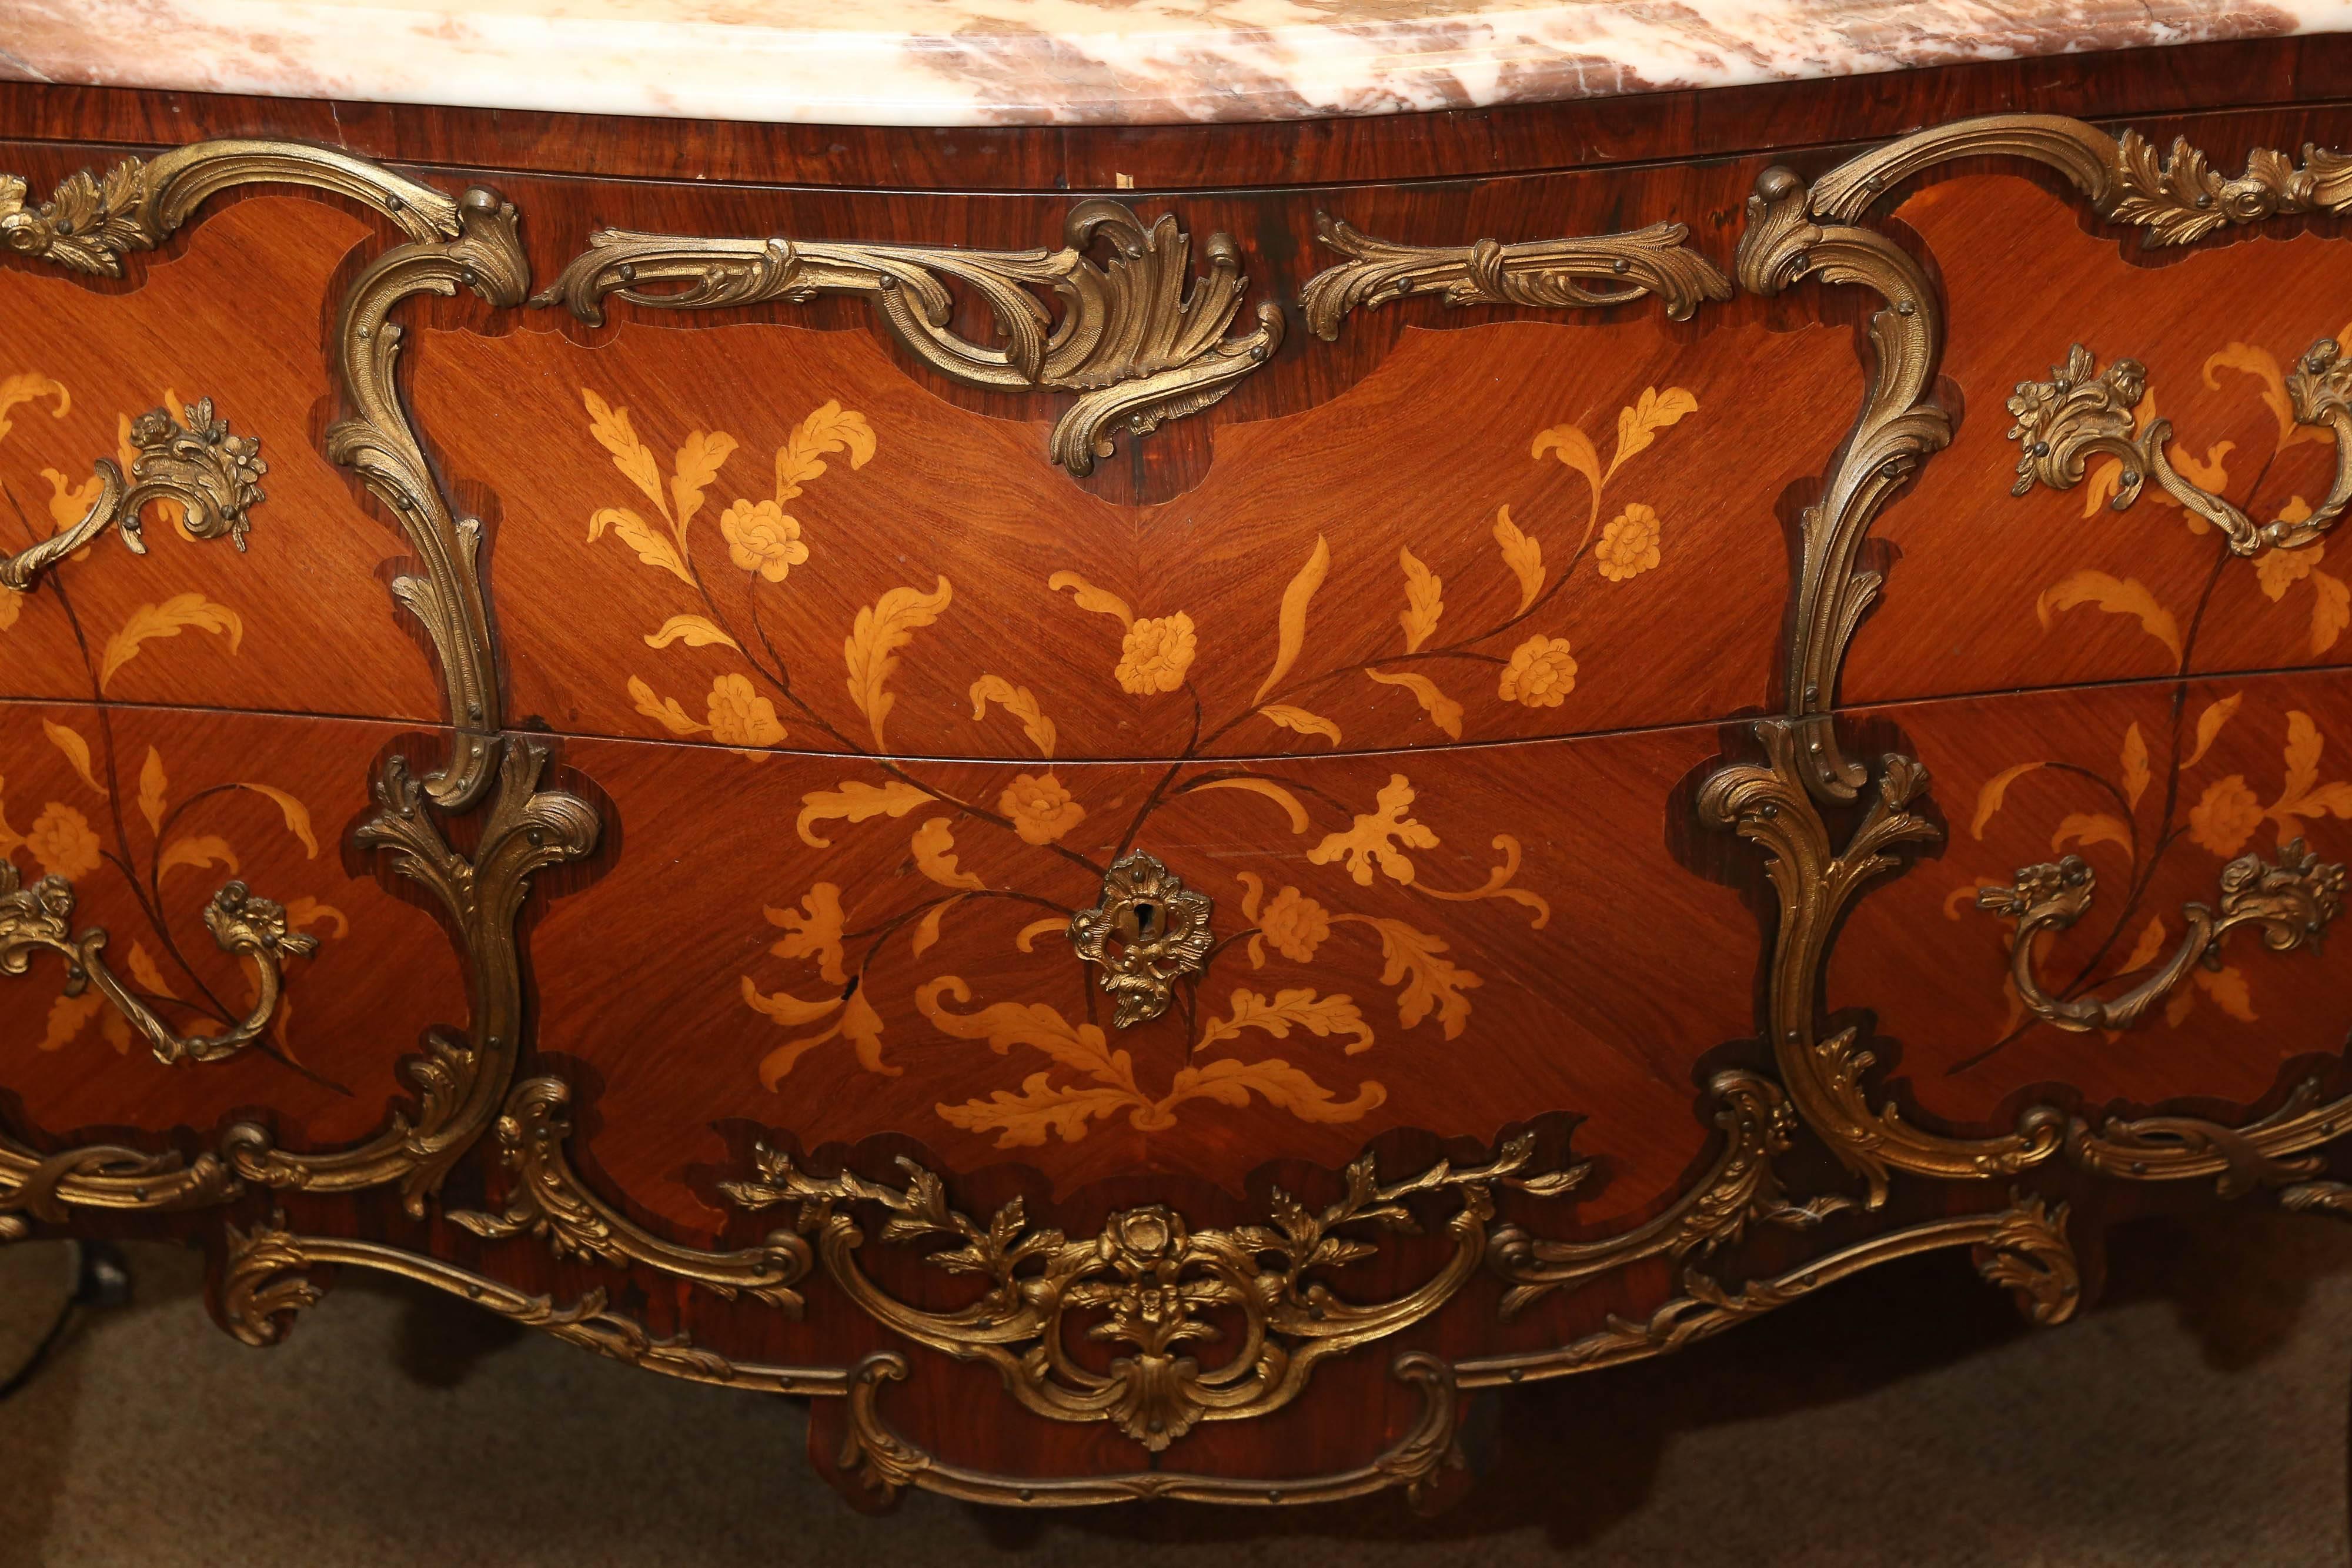 Pair of French commodes with marble in shades of pale violet and cream
color. They are inlaid in a foliate design and the wood is a combination
of kingwood, tulipwood and walnut. Ormolu bronze mounts surround
The foliate design and mounts of a